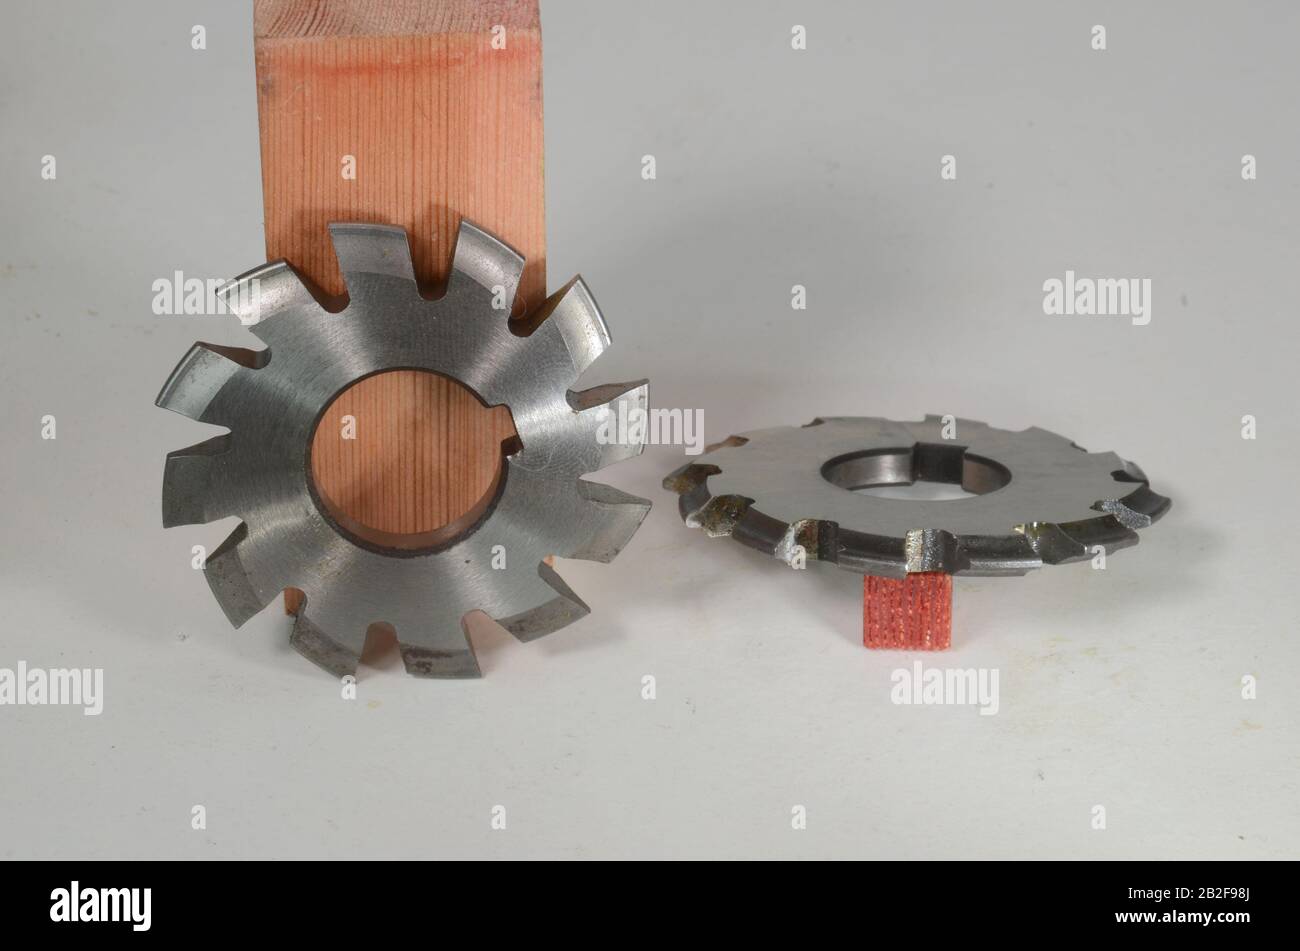 Milling tools for making teeth on gear wheels, two alike speciments, one in side view and one in profile view Stock Photo